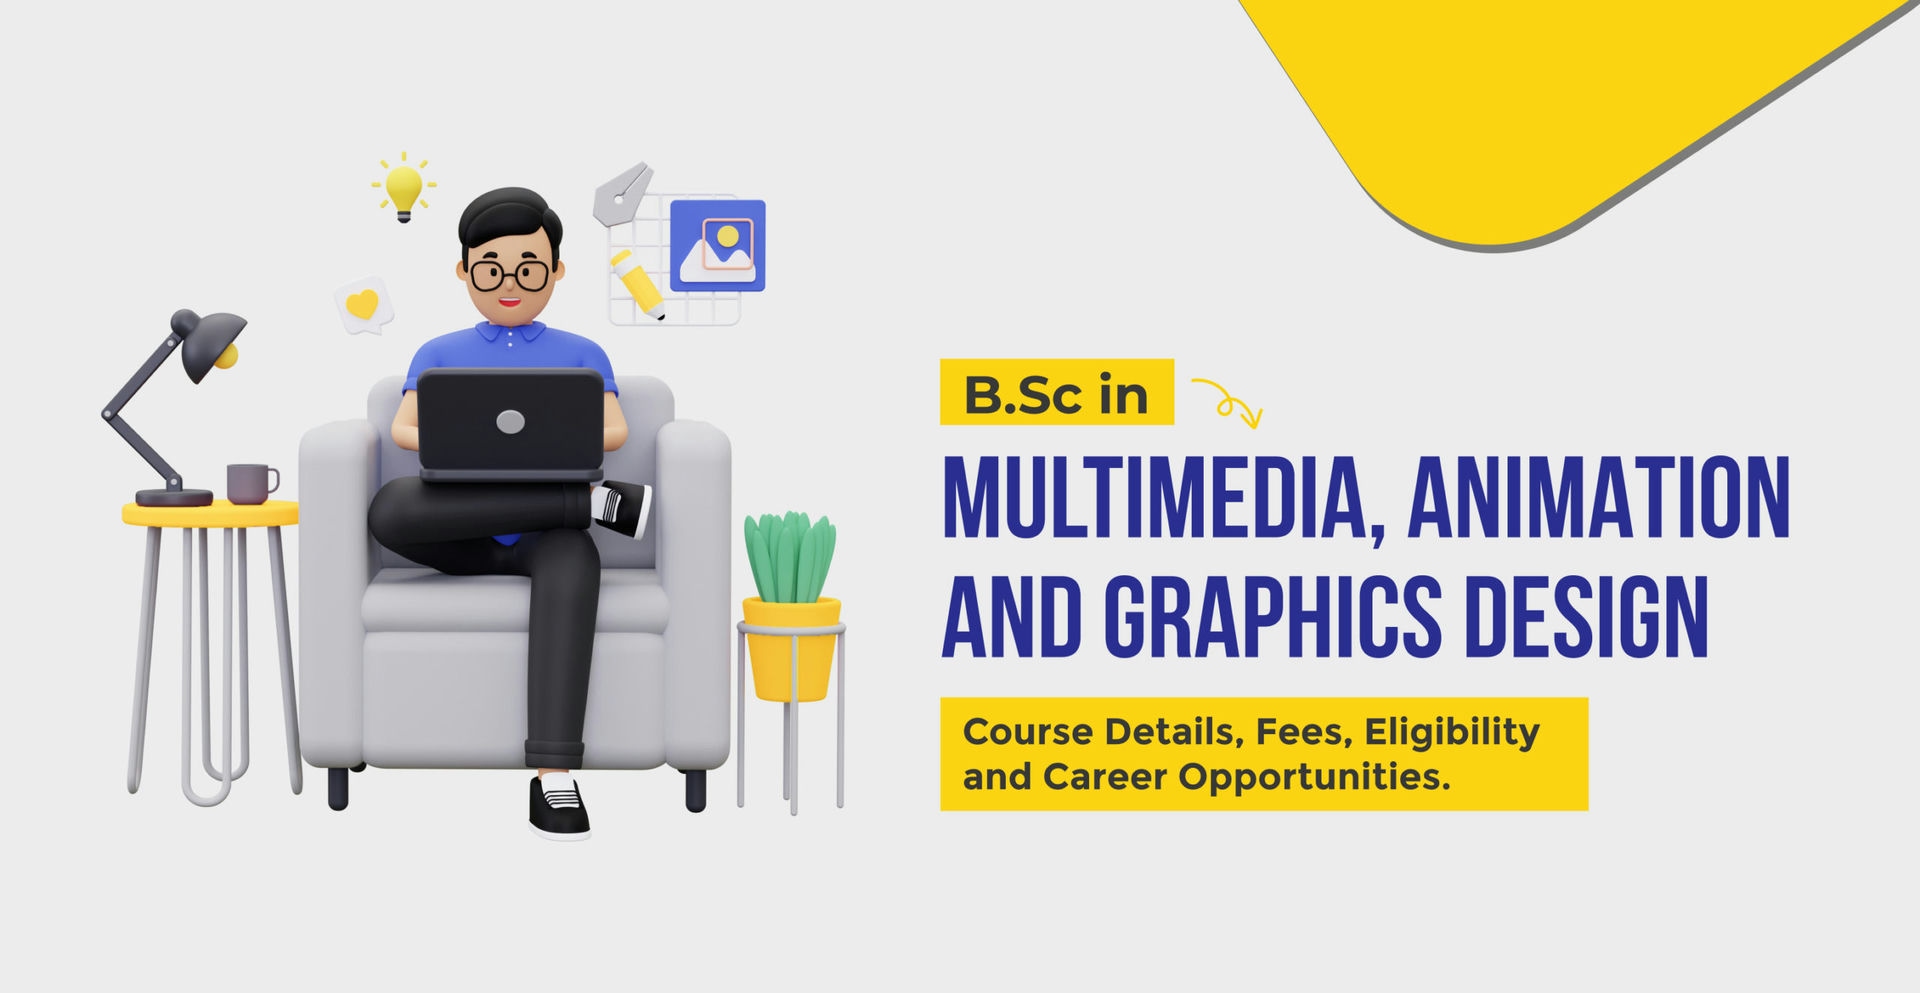 All about BSc in Multimedia, Animation and Graphics Design